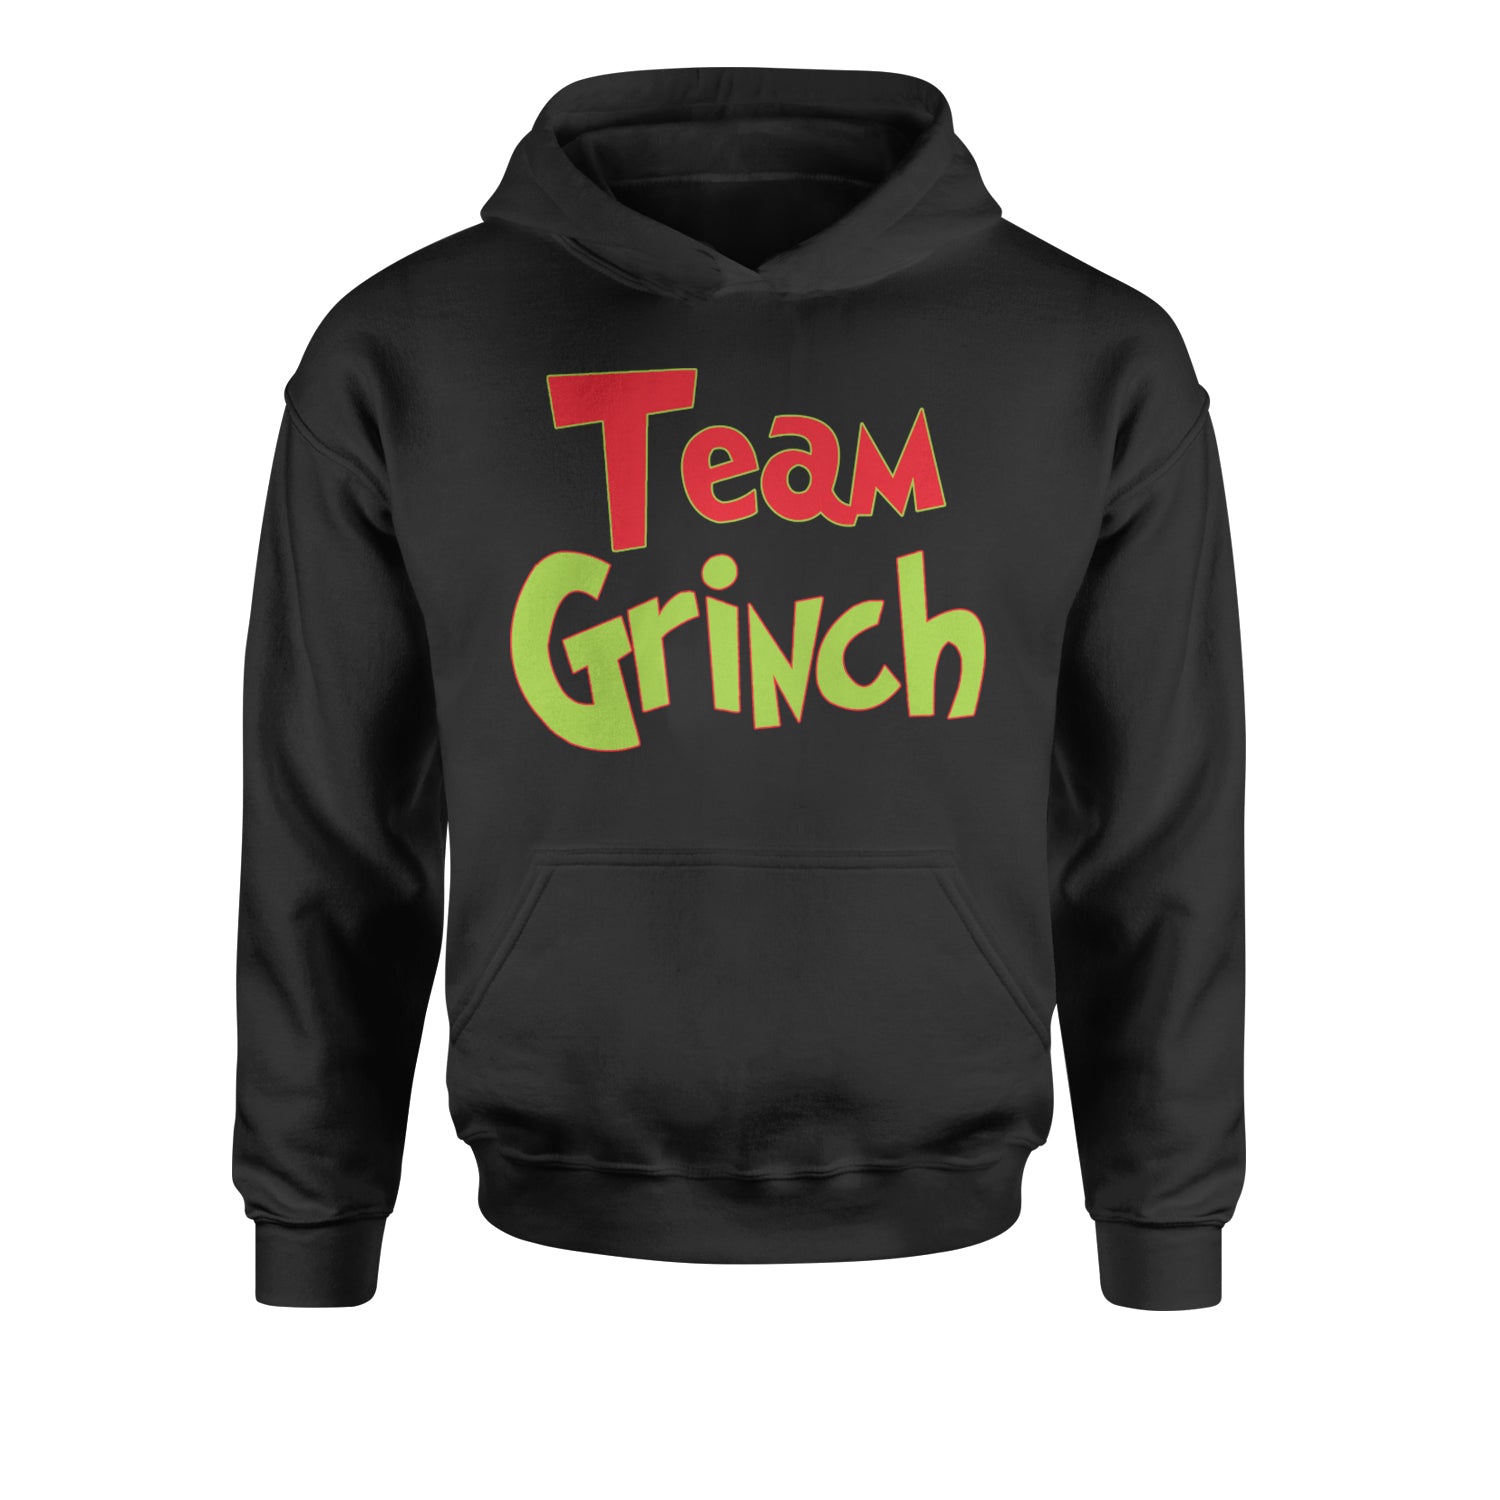 Team Gr-nch Jolly Grinchmas Merry Christmas Youth-Sized Hoodie